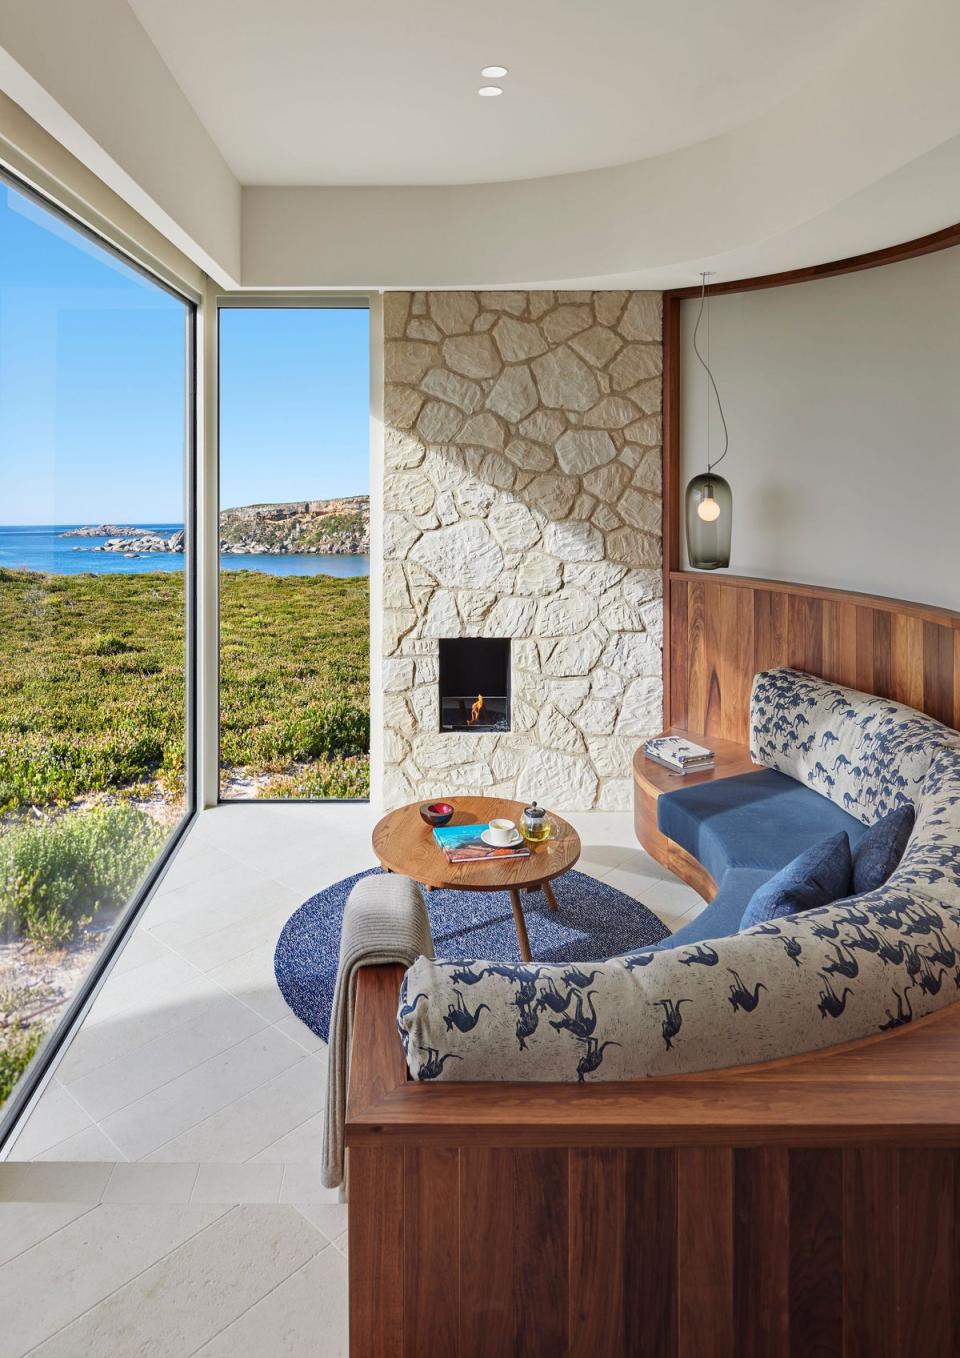 A Flinders lounge Overlooking the sea (Baillie Lodges)